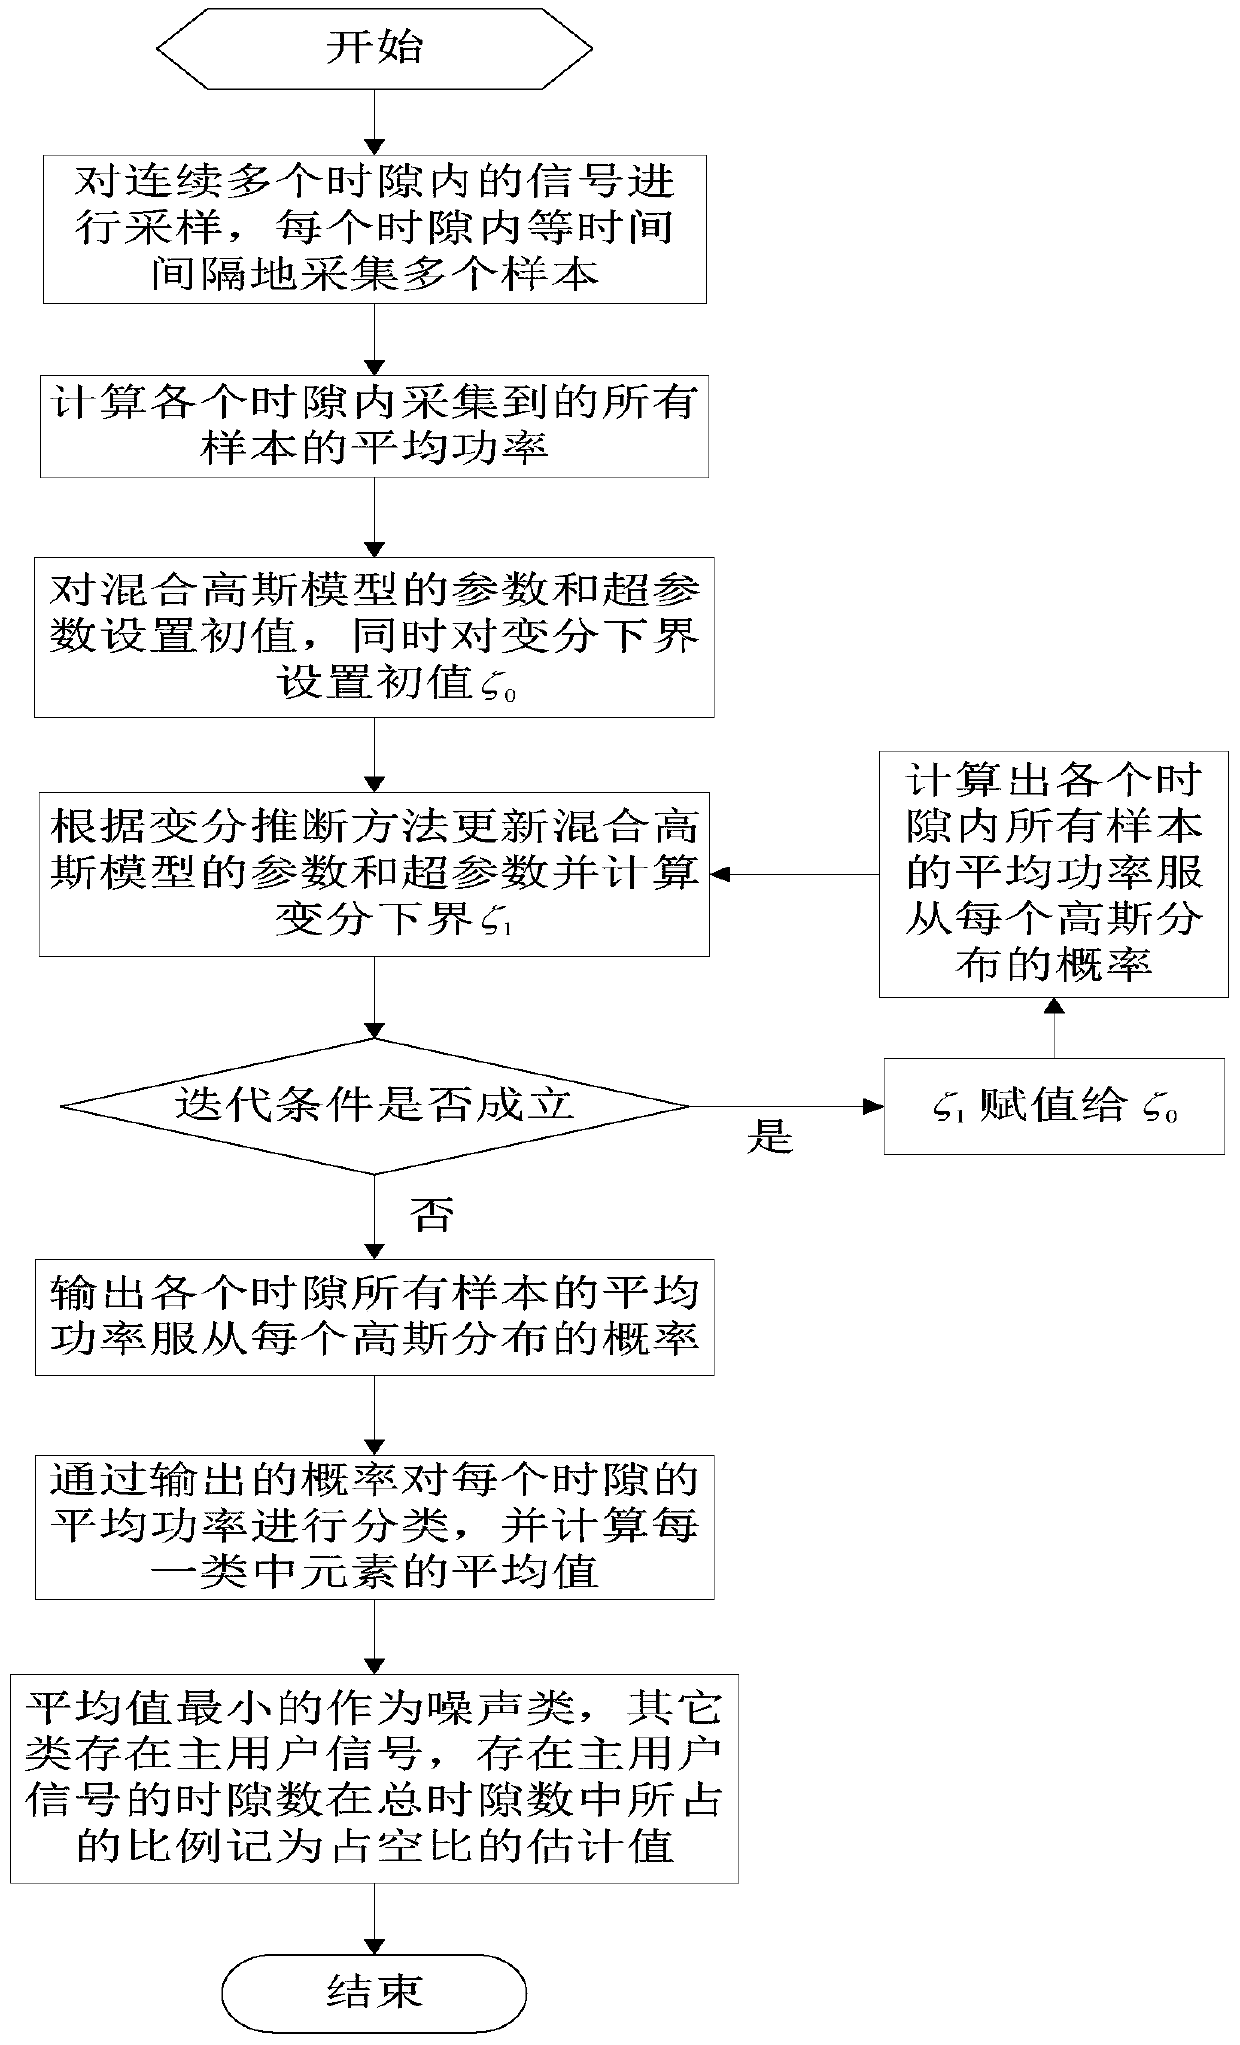 Method for estimating master user duty ratio through variation inference